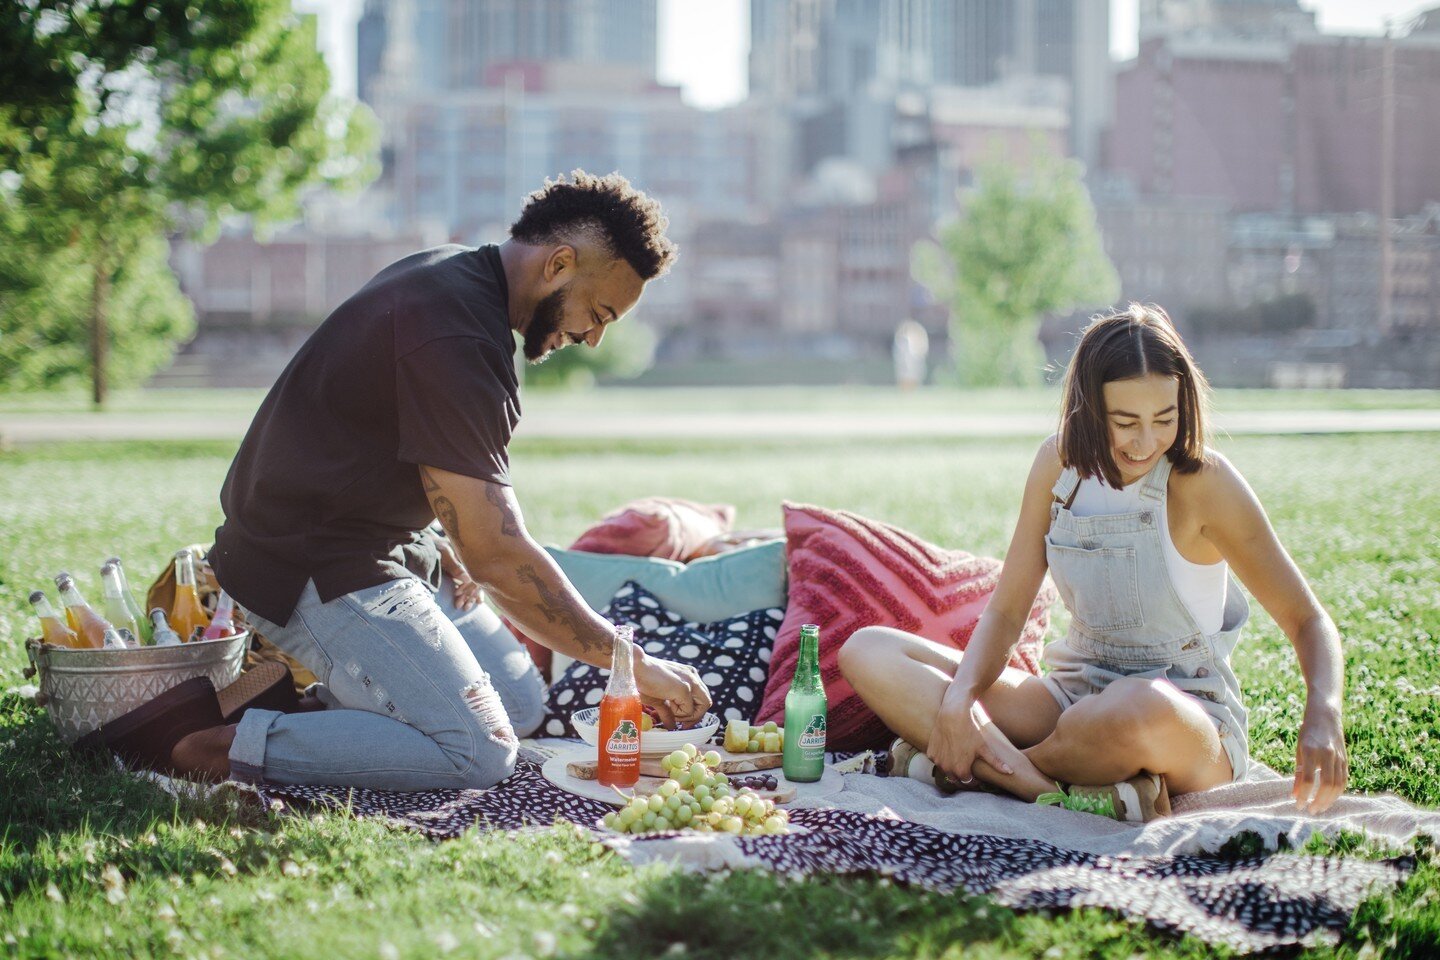 Spring is in the air and love is in bloom! 💐🌸🌻 If you're looking for some fun and romantic date ideas to enjoy with your special someone, then look no further! Here are a few of our favorite spring date ideas:
1️⃣ Take a picnic in the park and enj